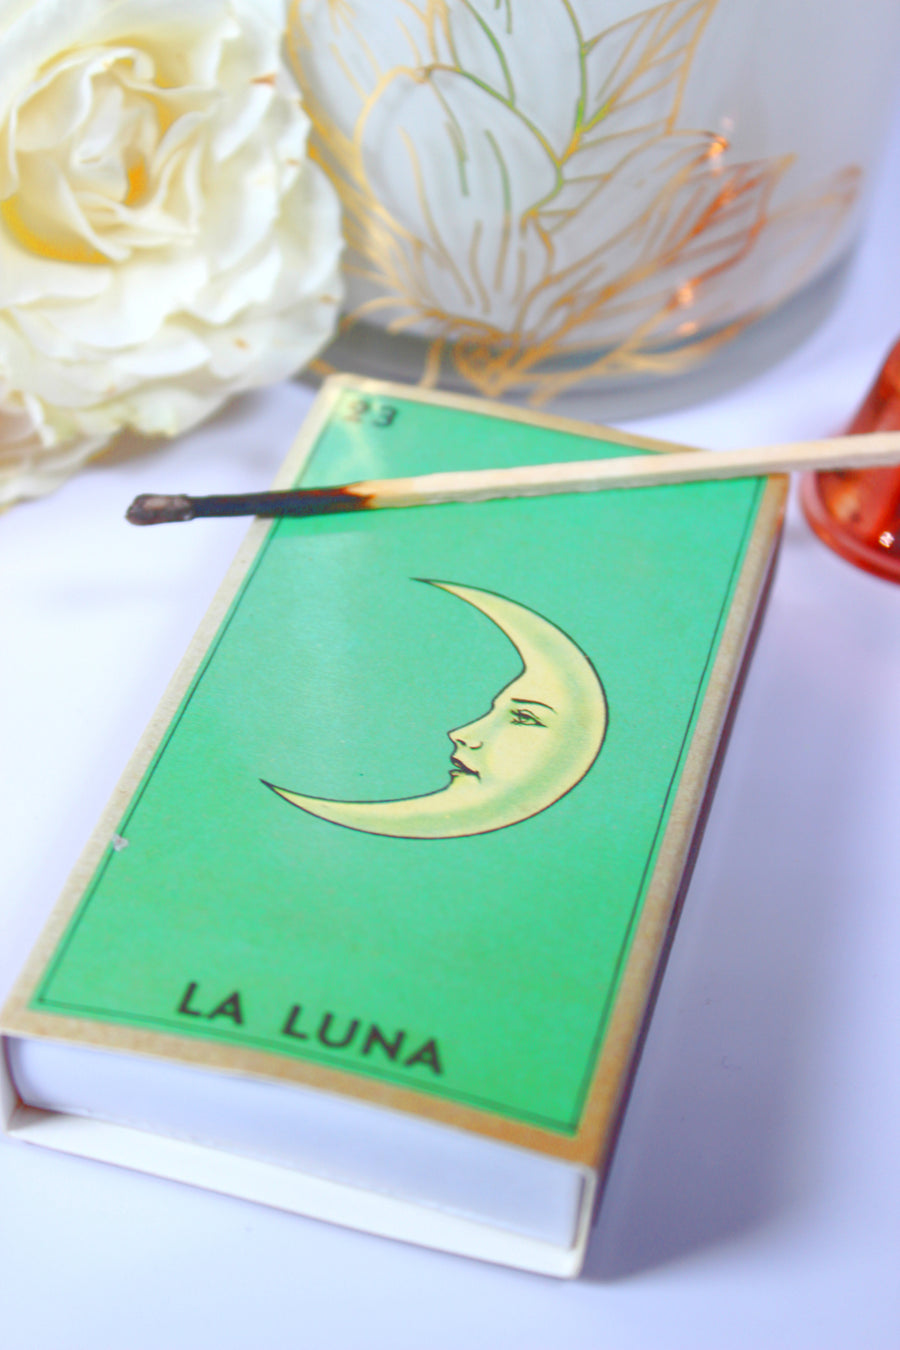 Celestial Themed Matches for Lighting Candles + Incense